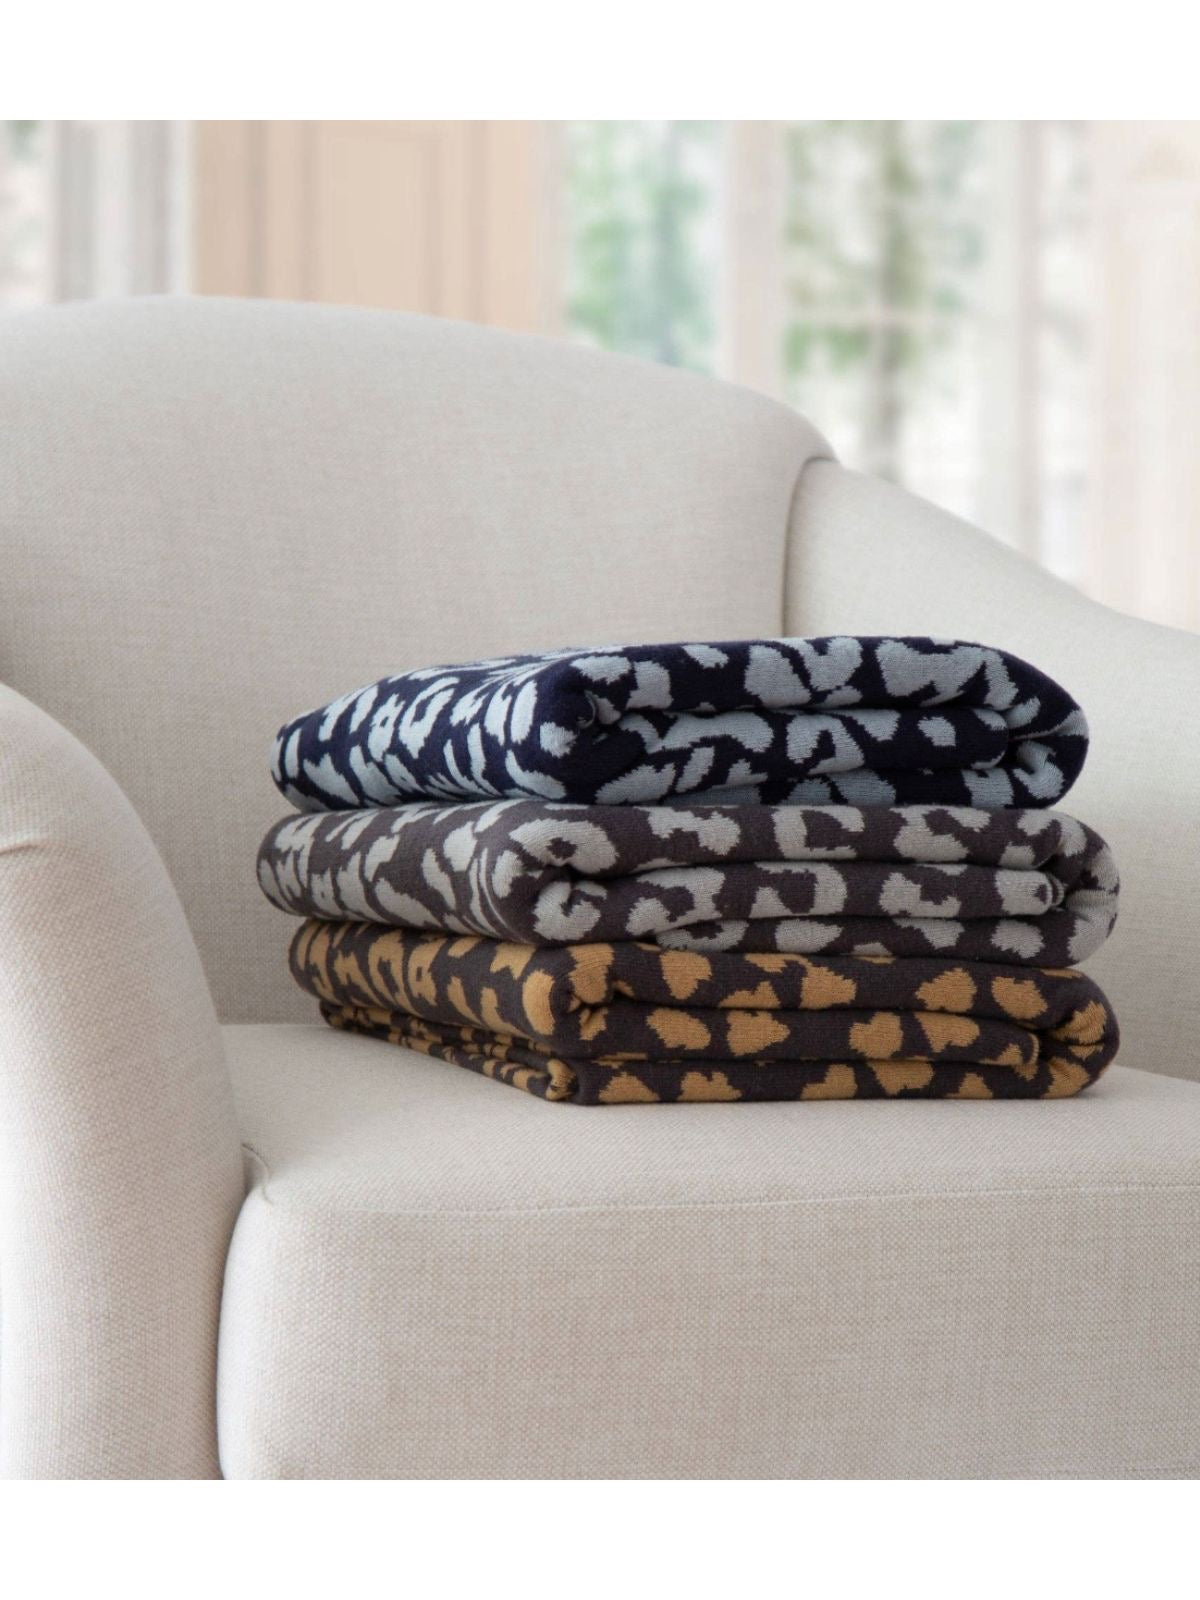 100% cotton leopard design throw blanket with lush hand feel fully reversible and yarn-dyed for lasting rich color. Available in 3 colors.